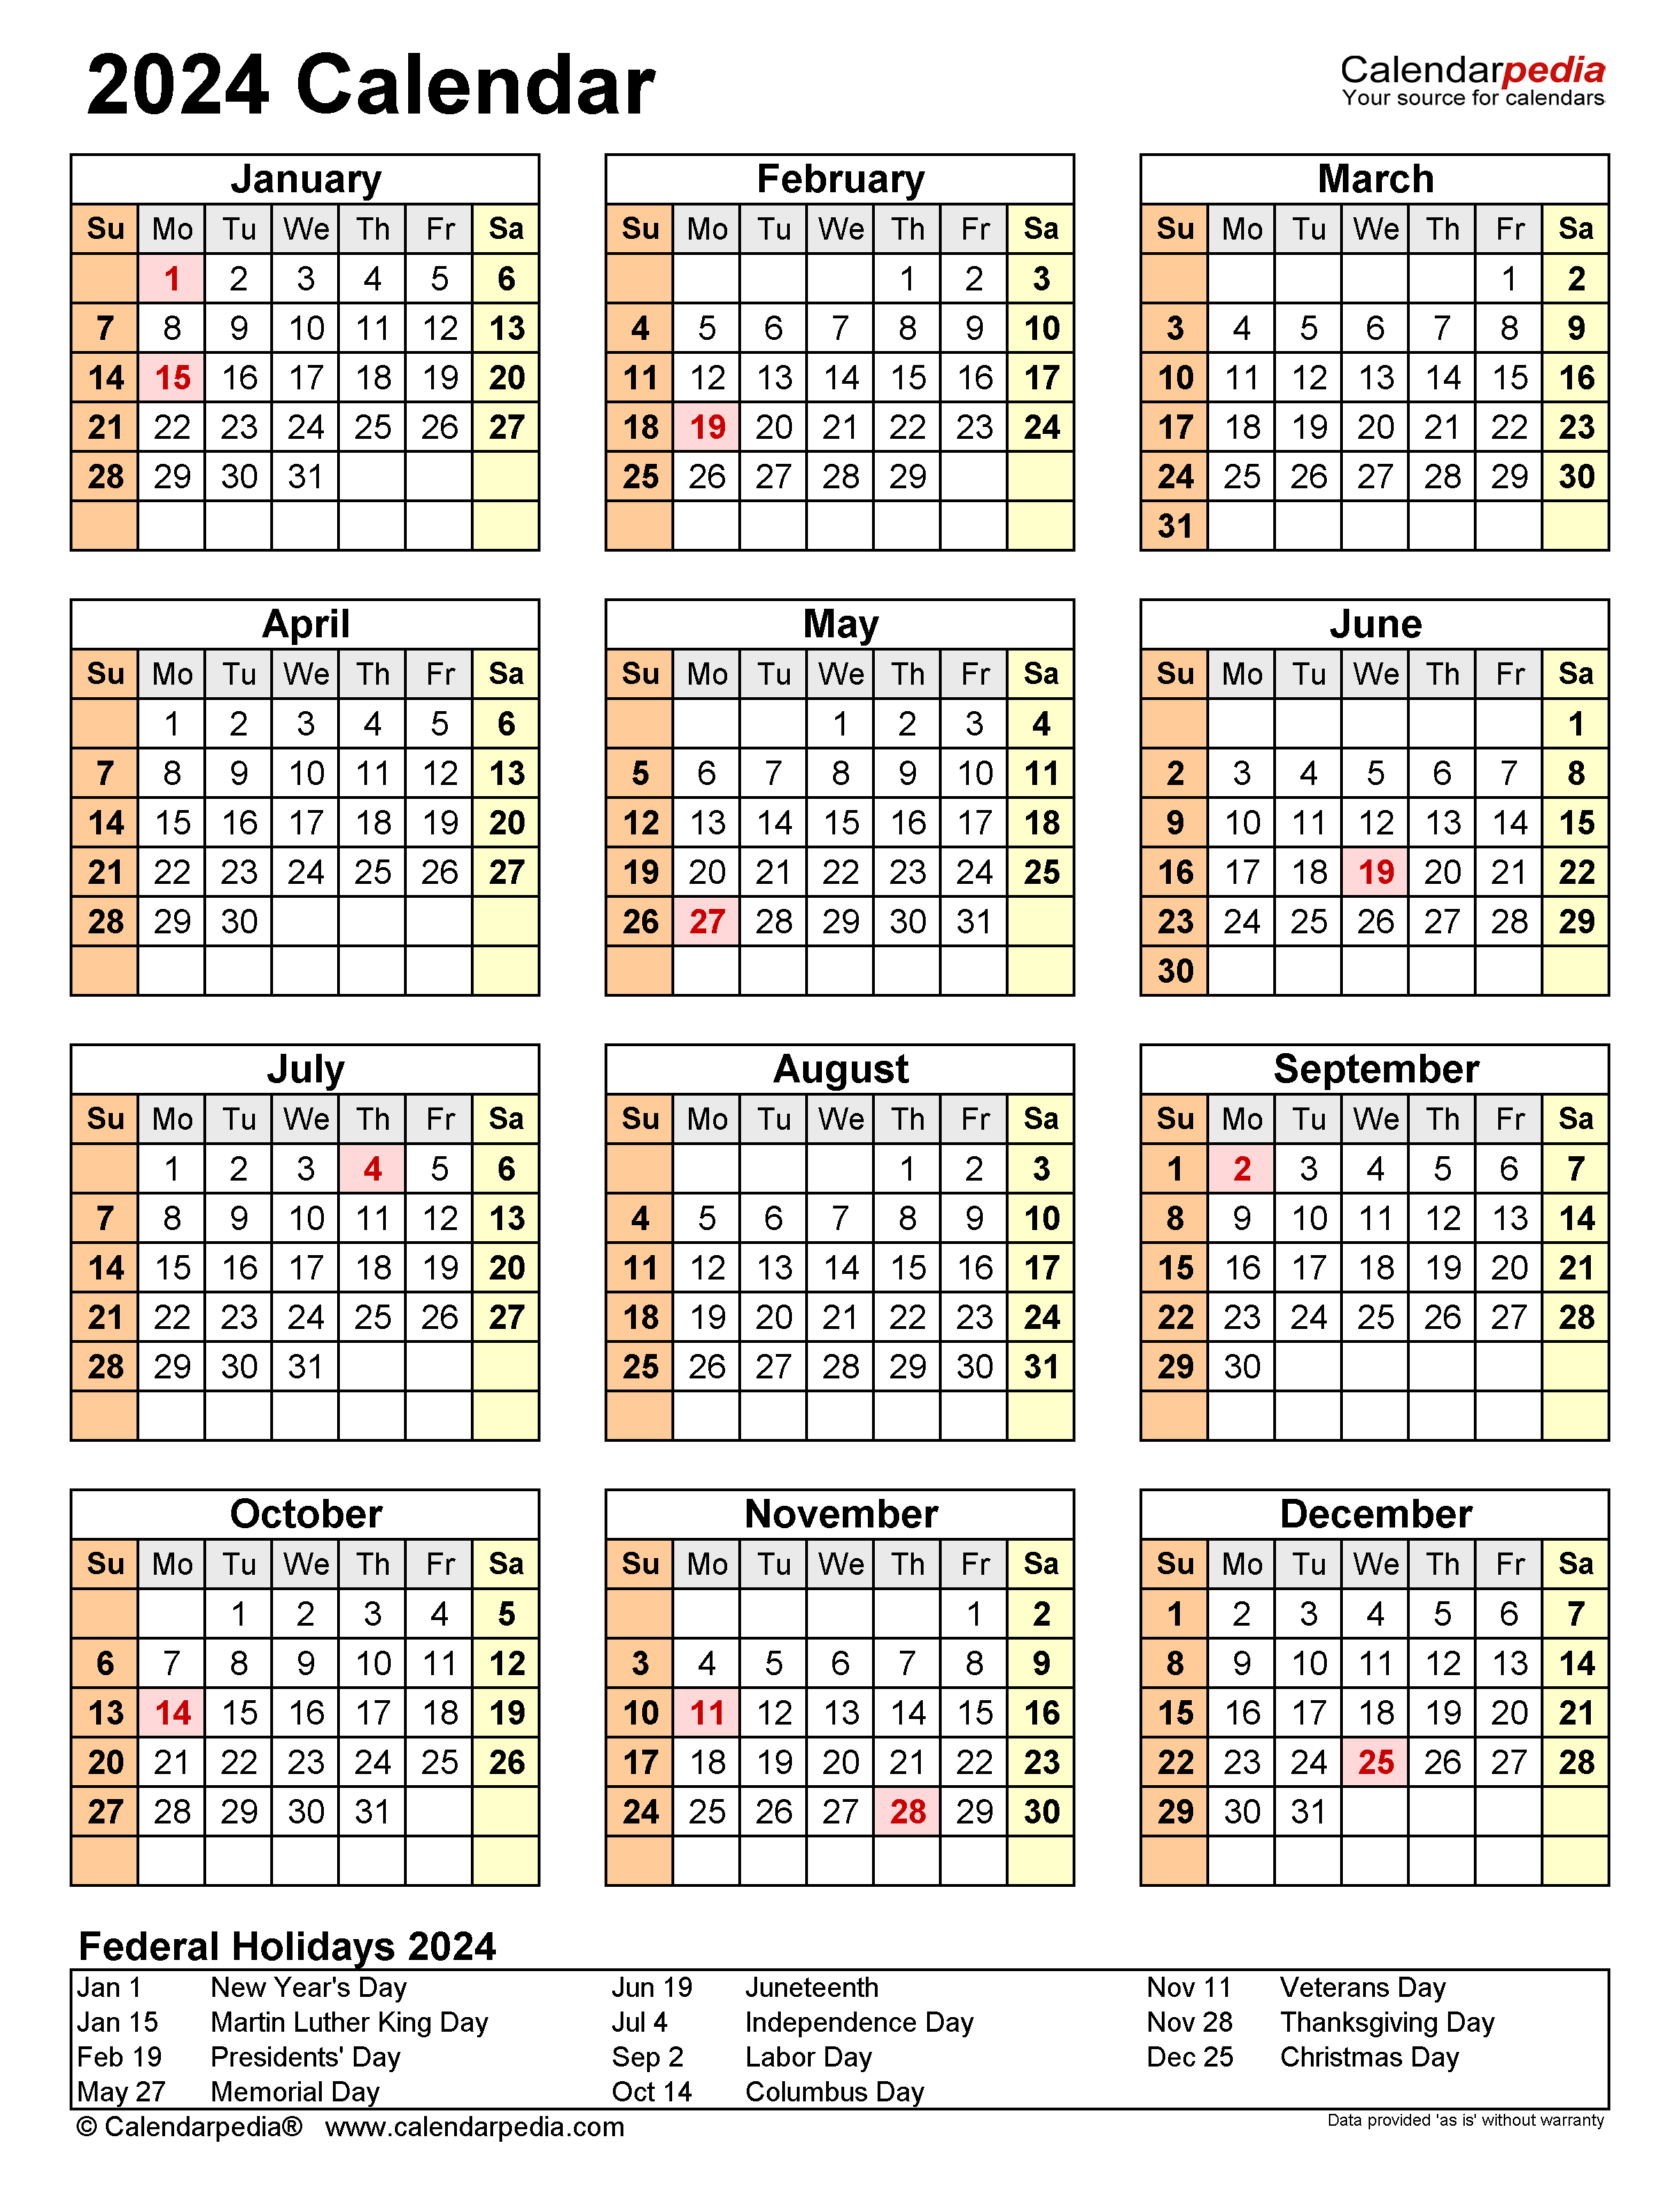 Free Printable 2024 Calendar With Holidays Crownflourmills - Free Printable 2024 Calendar With Holidays 2 Months Per Page